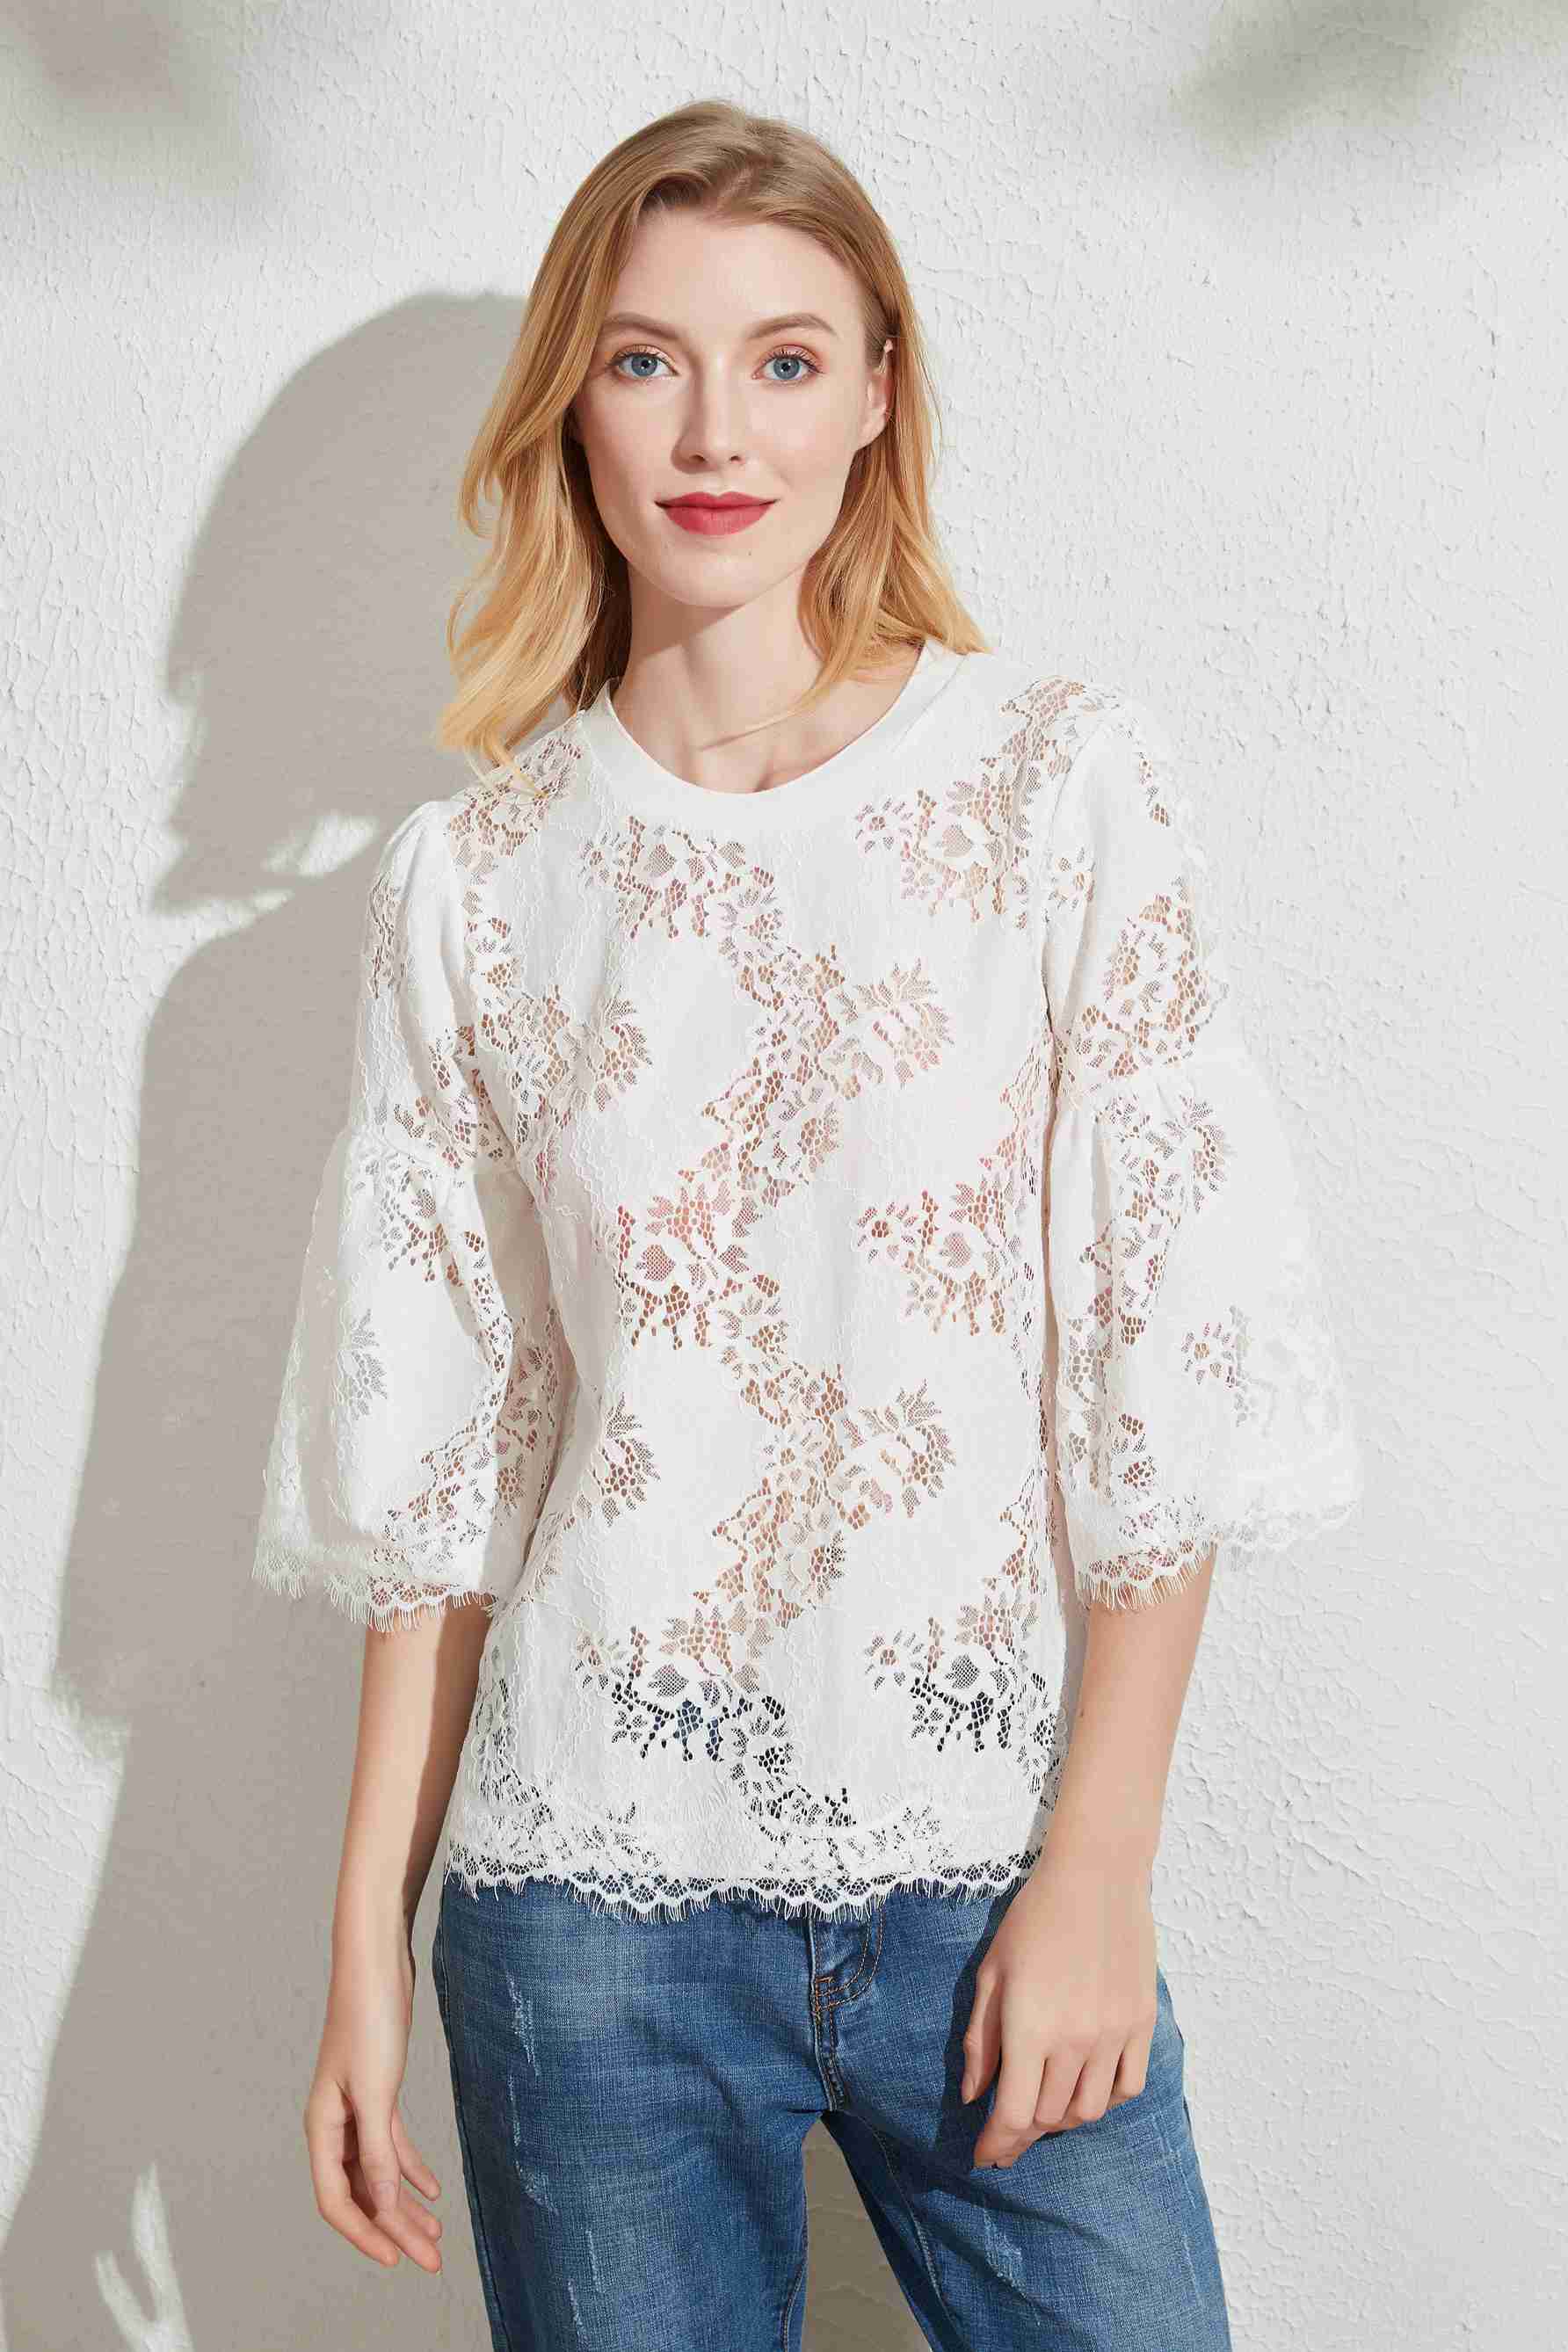 Lady's White Lace Top